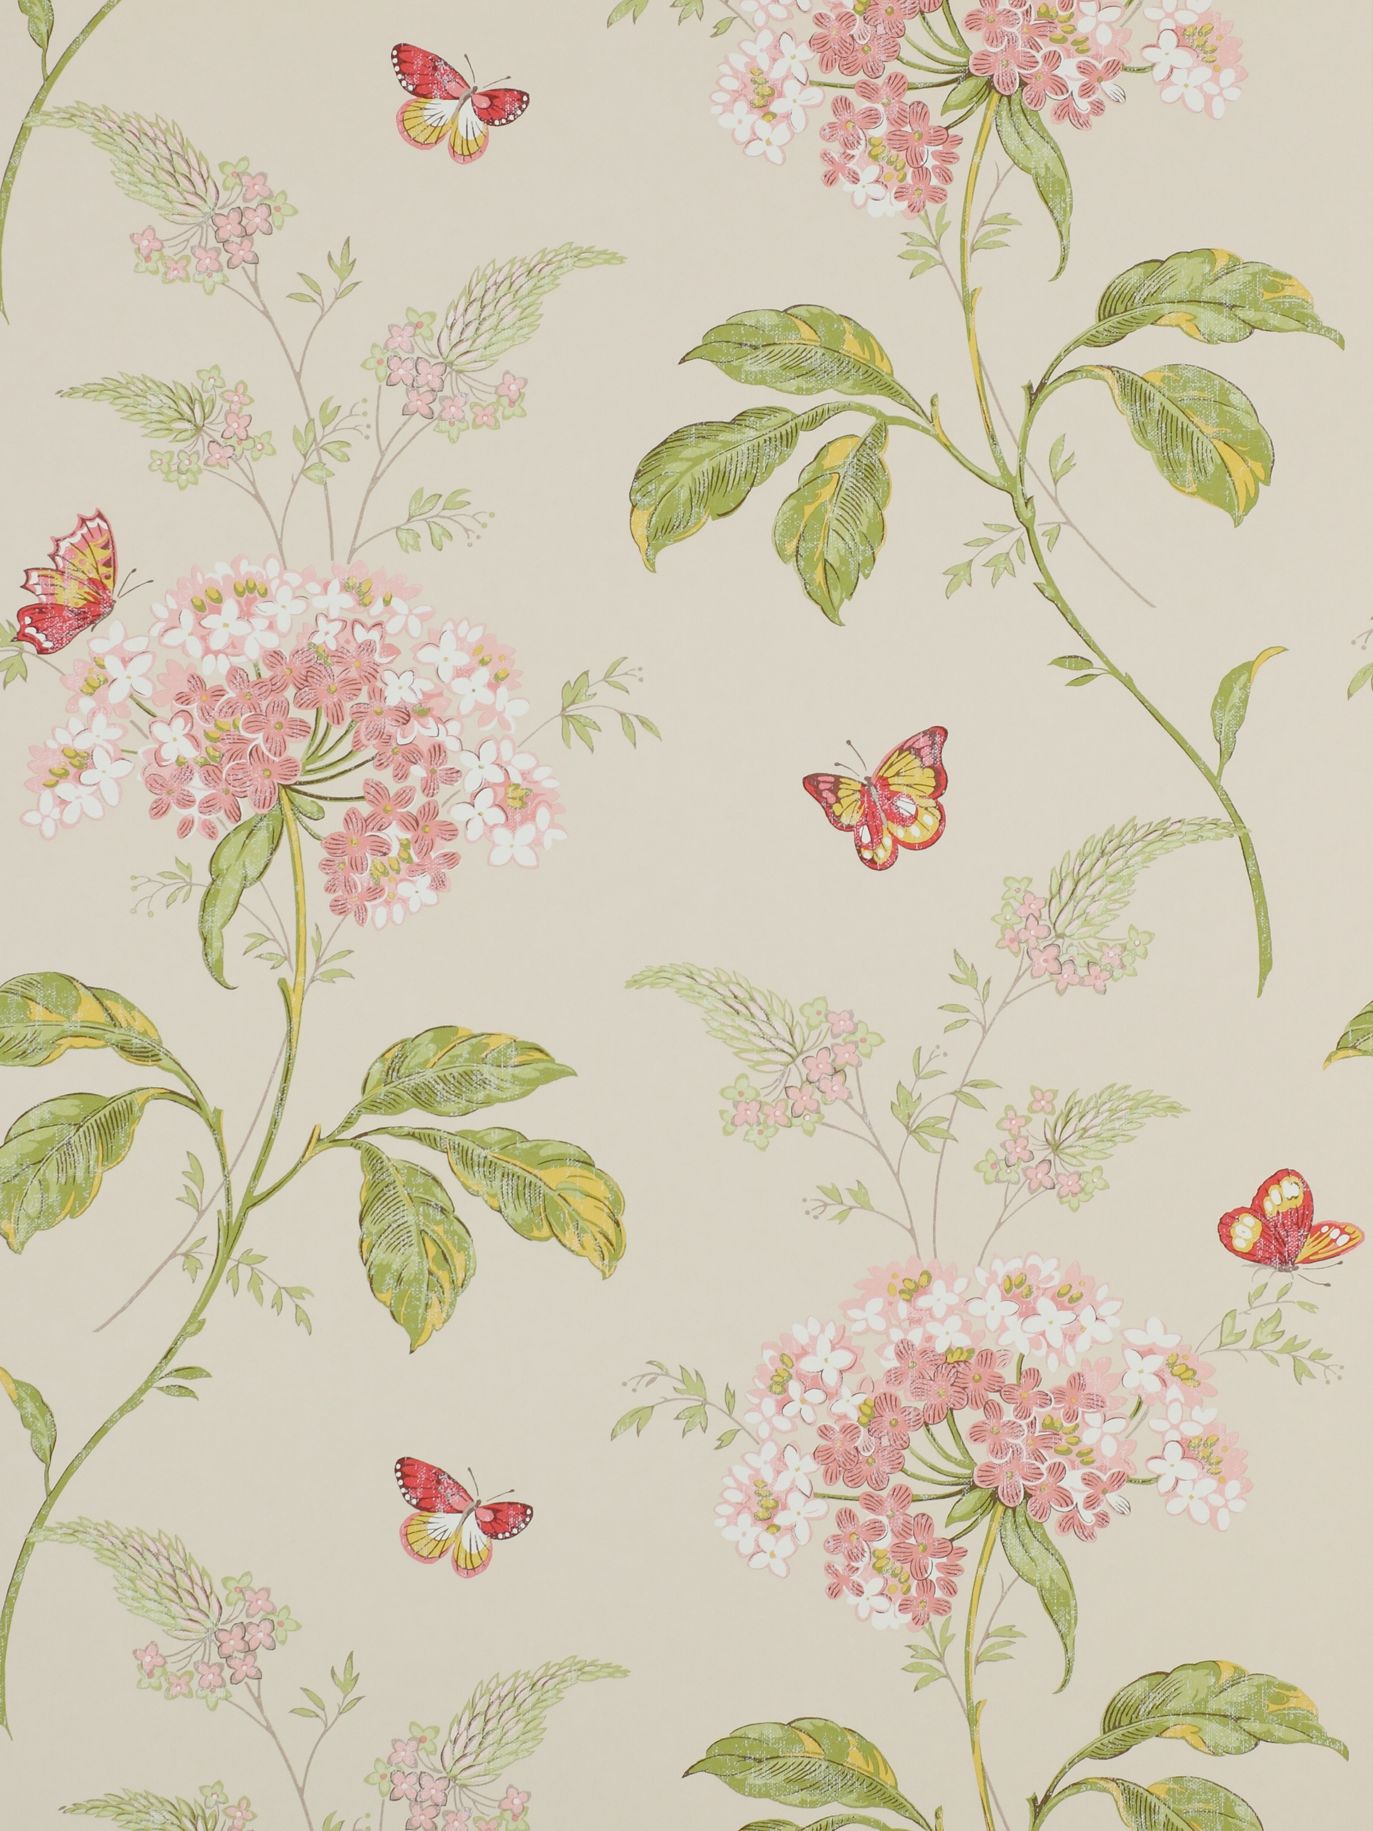 Download Blue And Pink Gucci Pattern Wallpaper